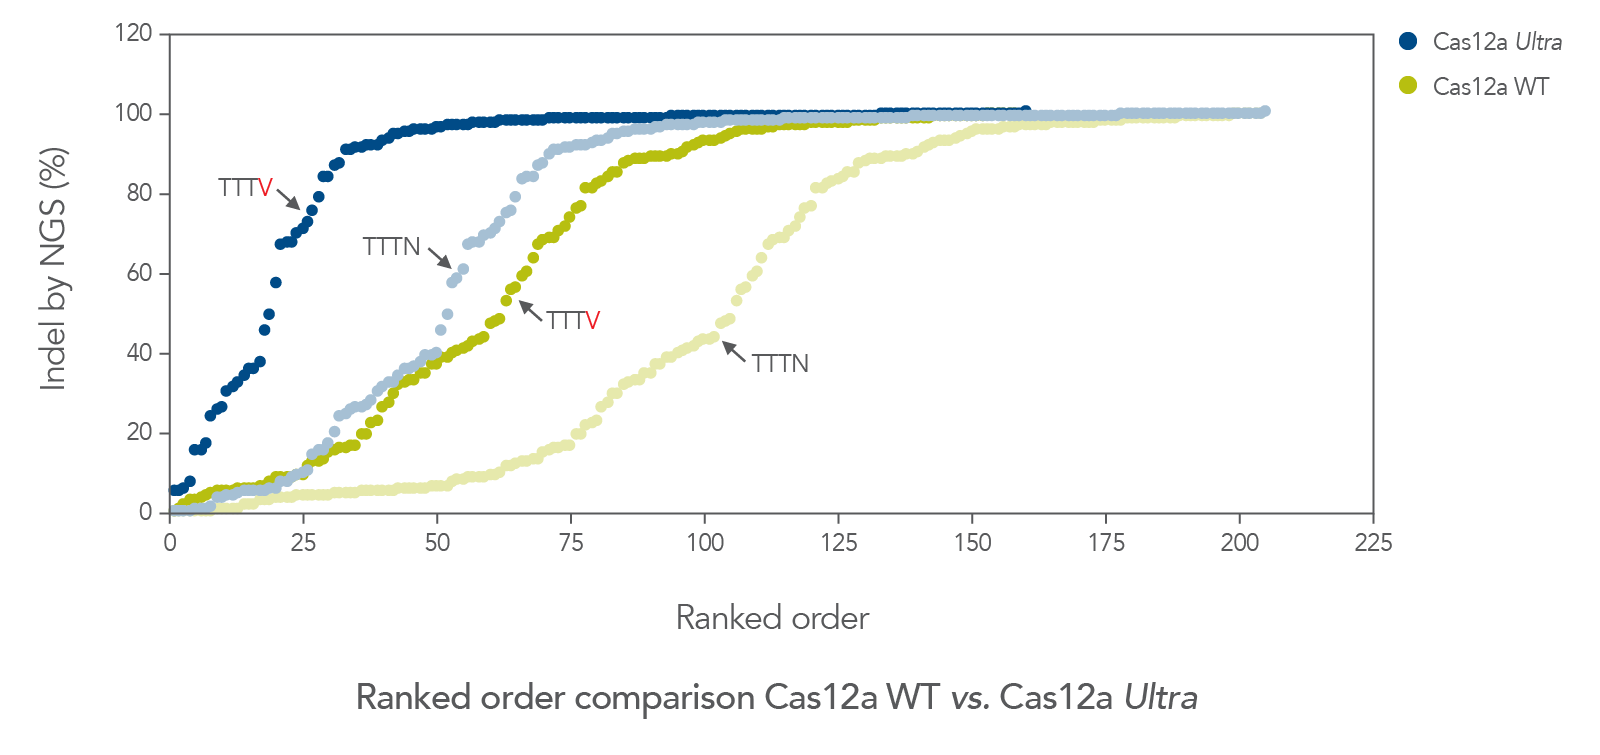 Cas12a Ultra: superior editing efficiency at TTTV PAM sites